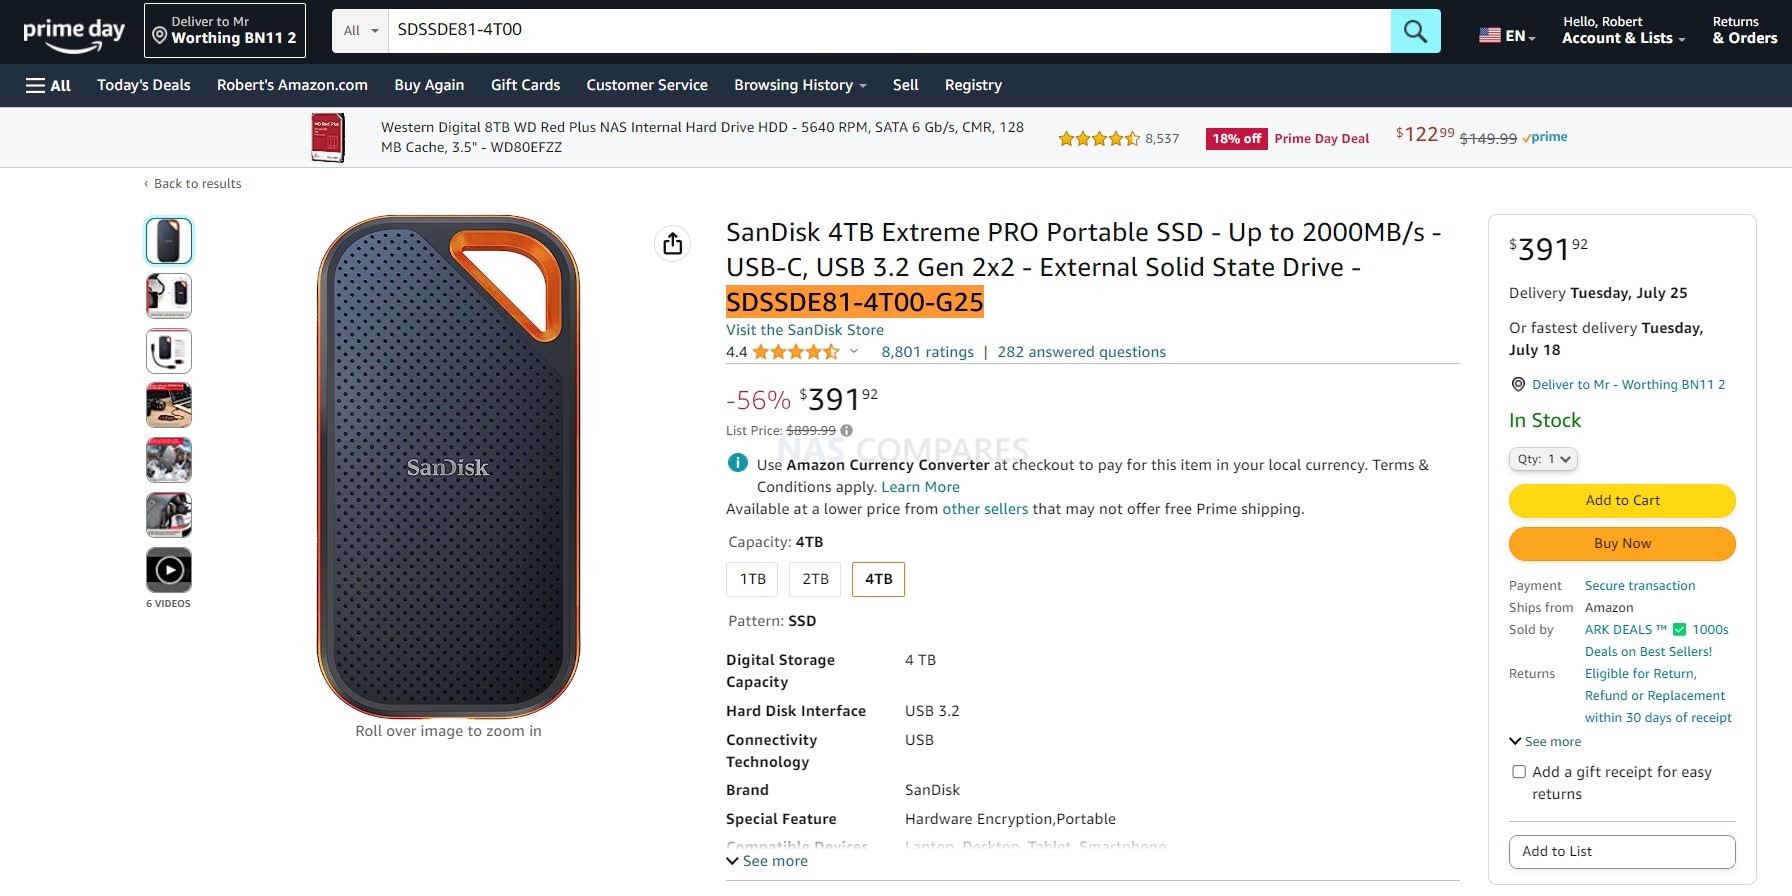 SanDisk SSD Issues Caused by Major Hardware Weaknesses: Report